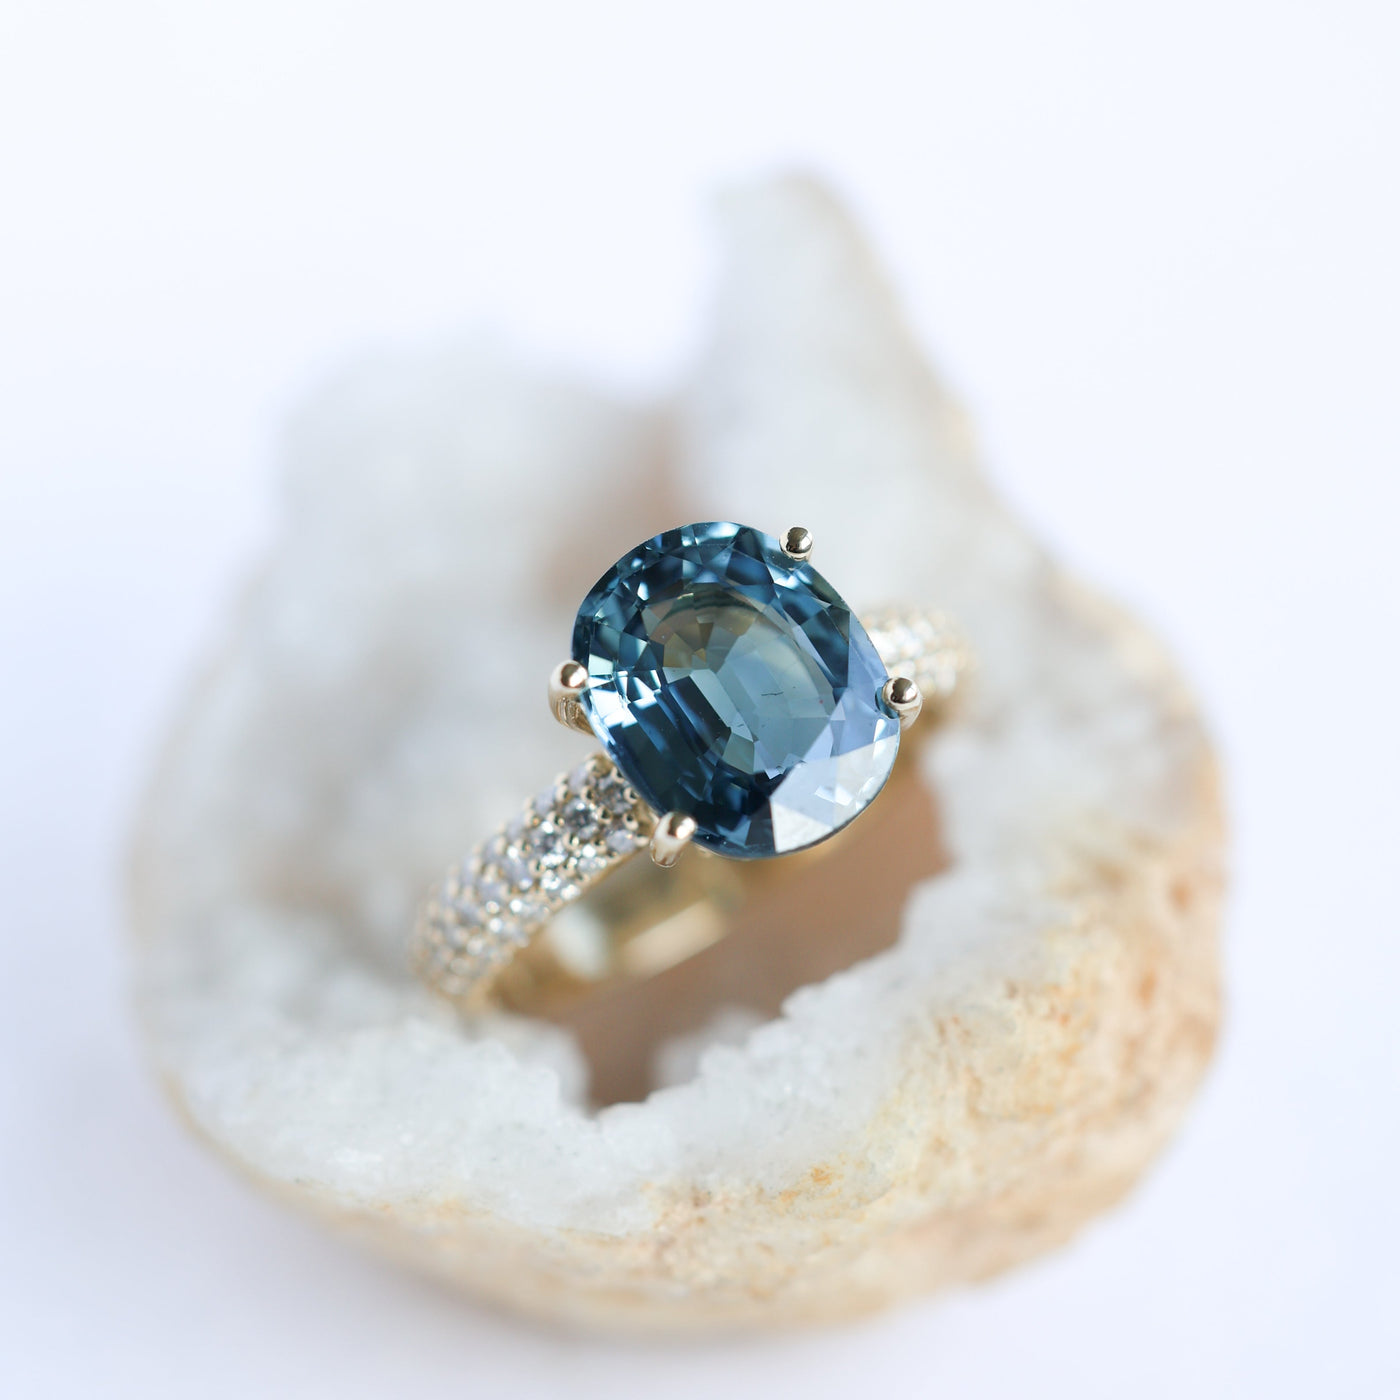 Oval-shaped blue sapphire ring with diamonds